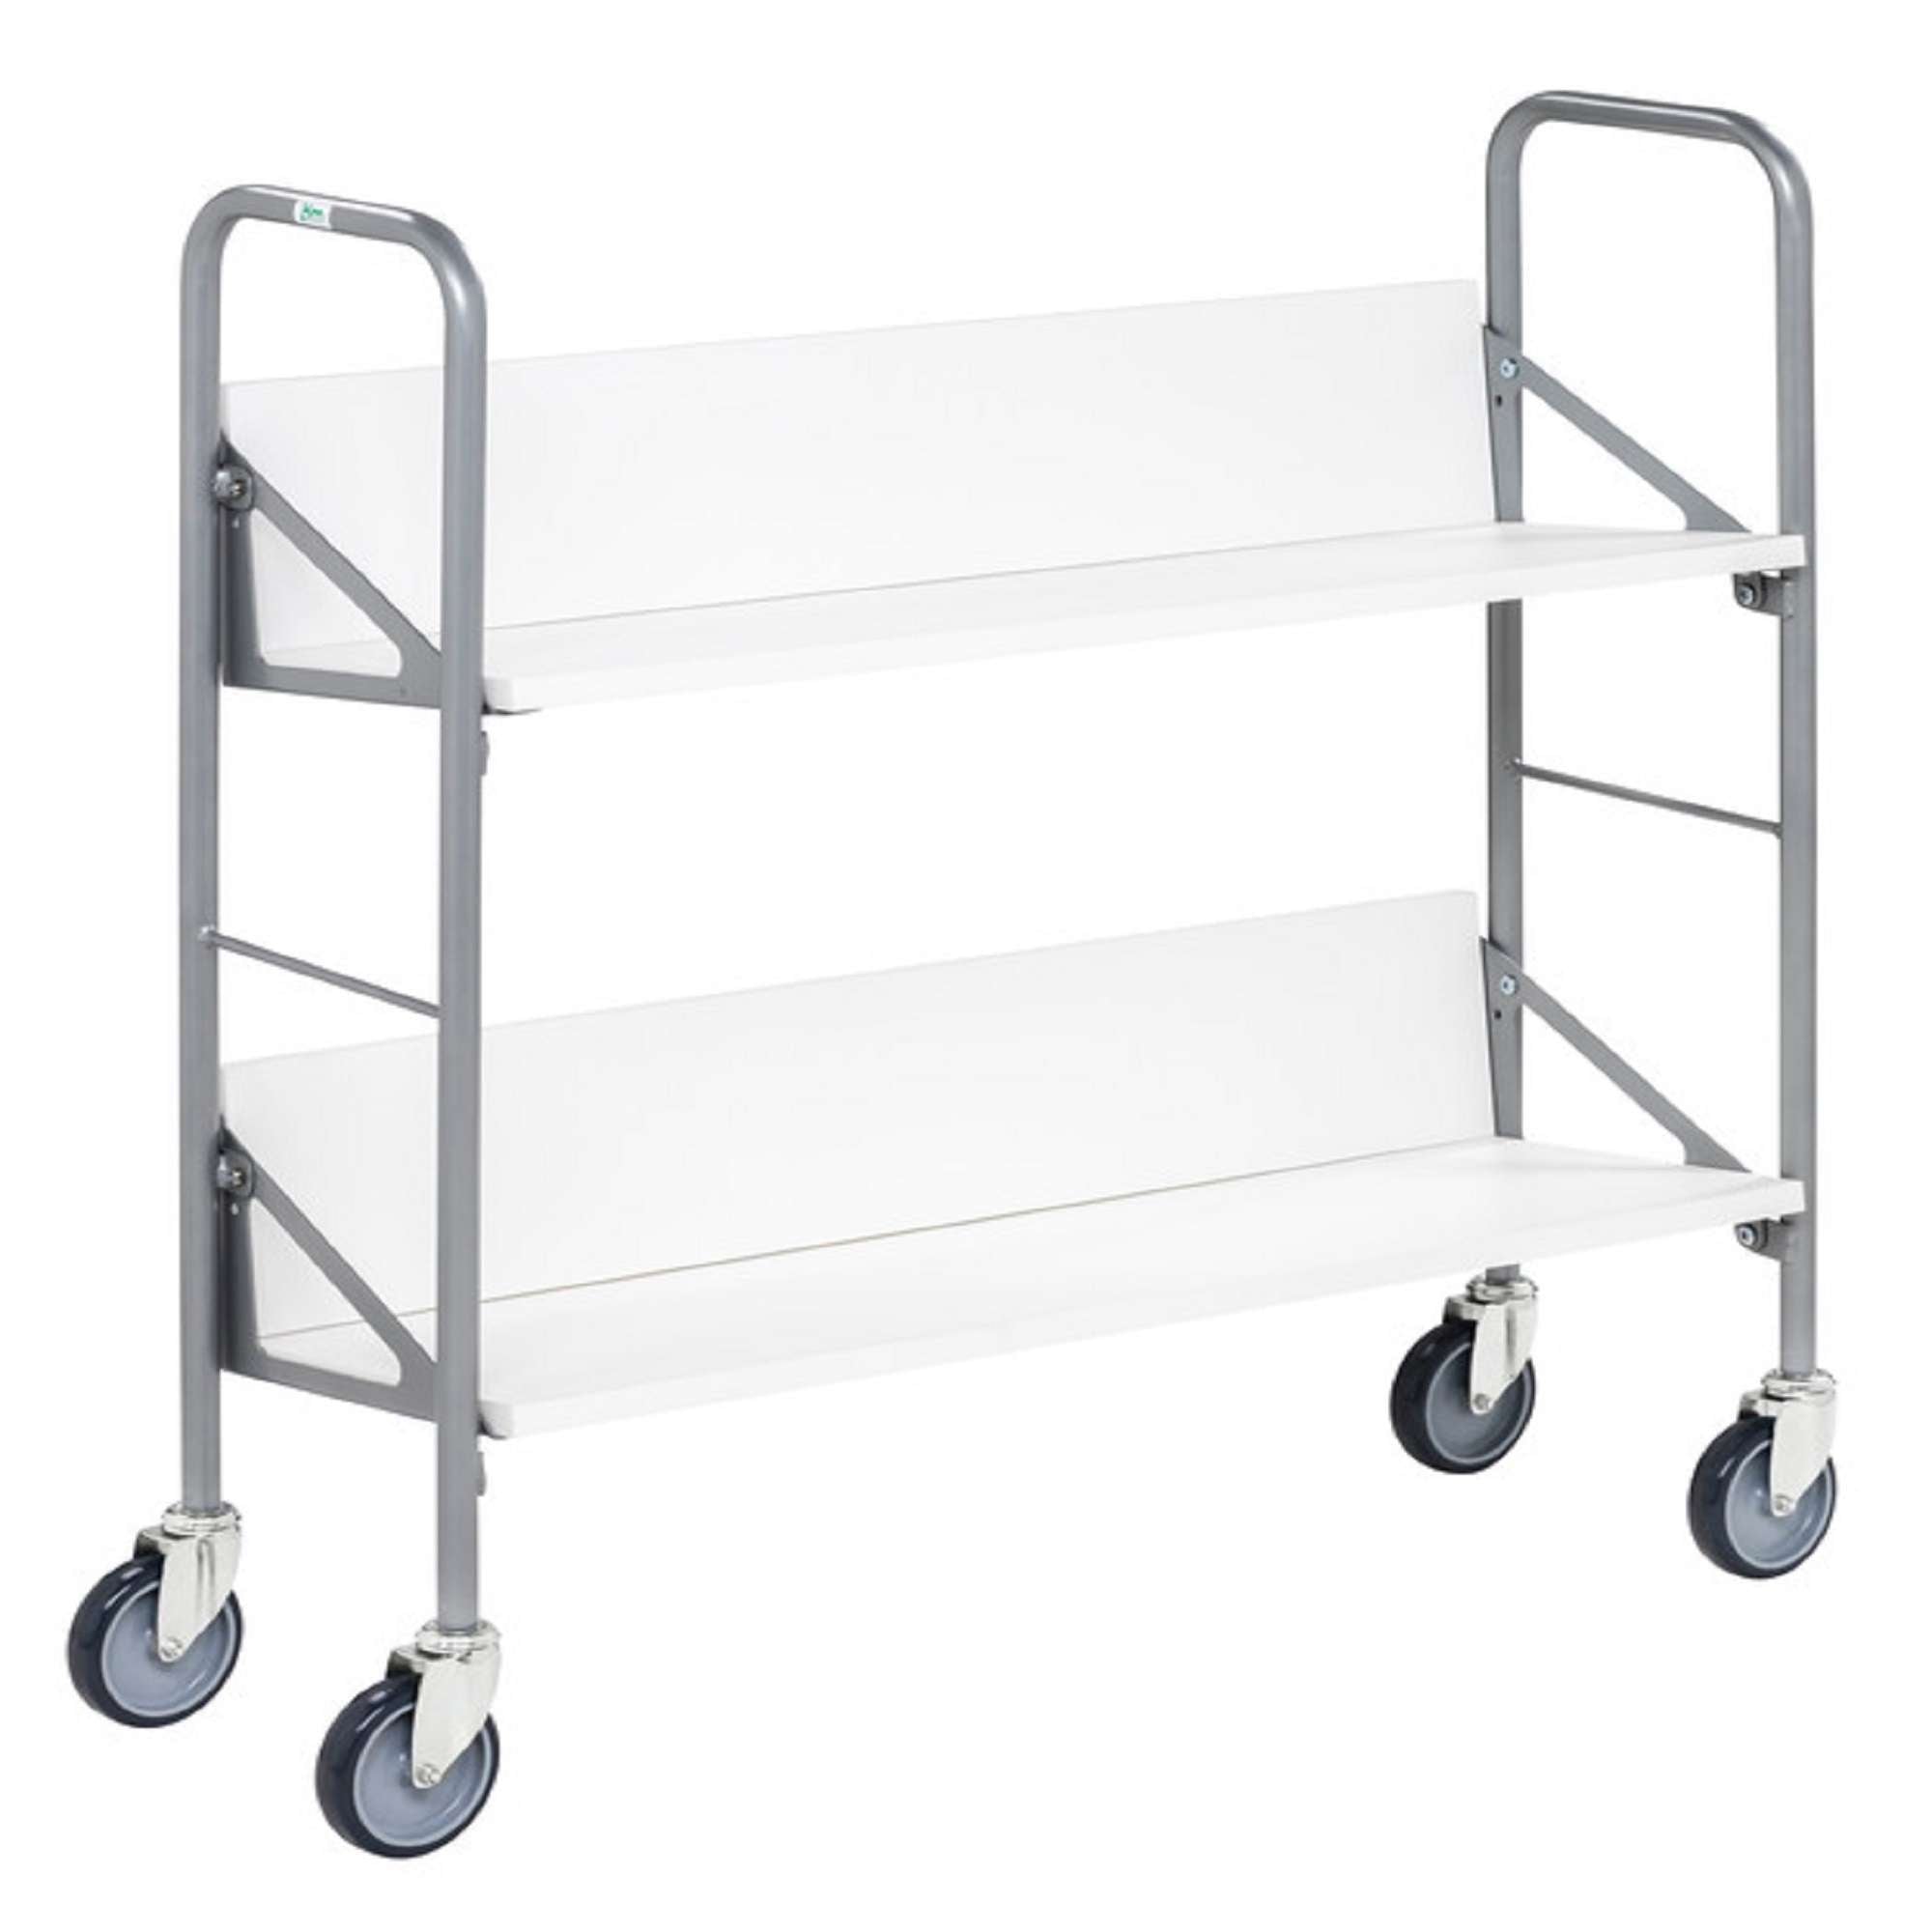 Grey / White Archive trolley with 2 slanted shelves LxWxH (mm) 900 x 300 x 920